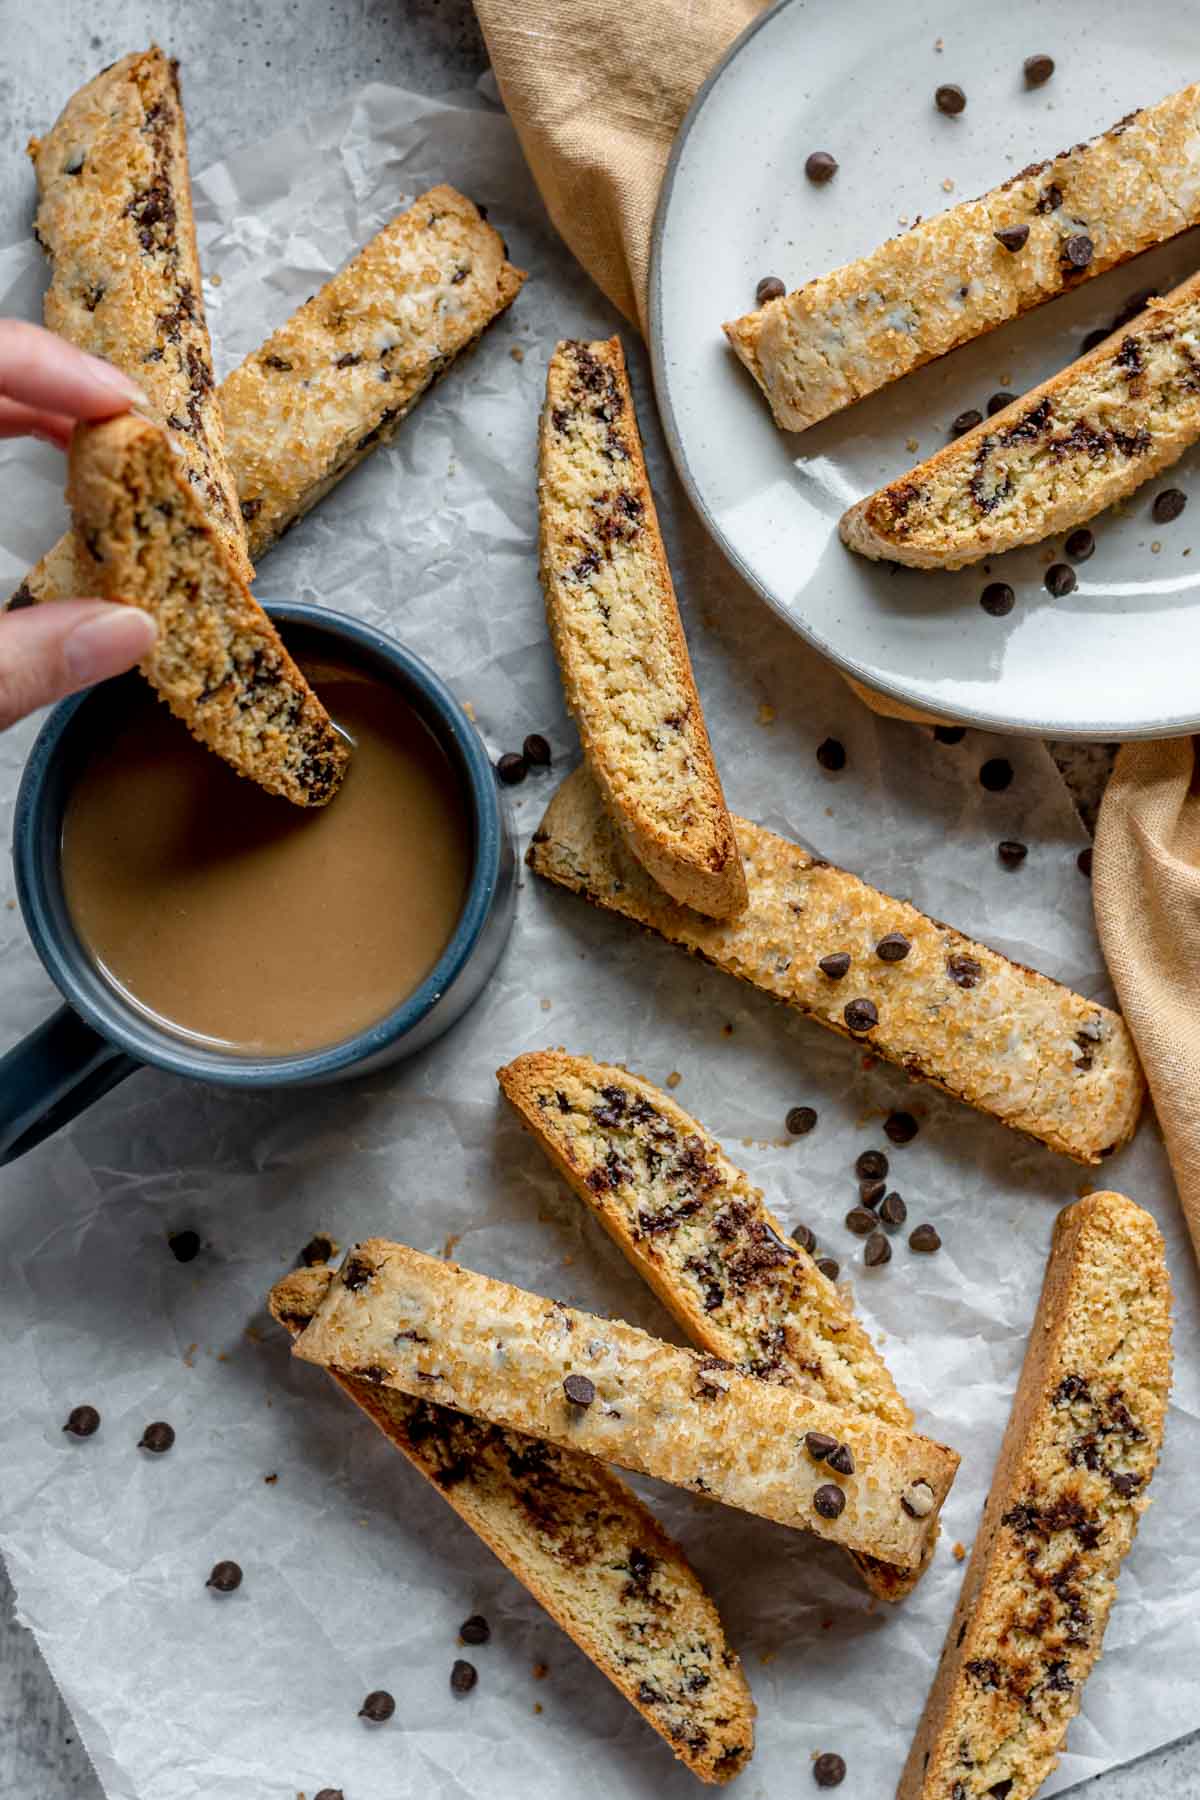 Chocolate Chip Biscotti baked cookie being dunked into cup of coffee with other cookies scattered on counter and plate